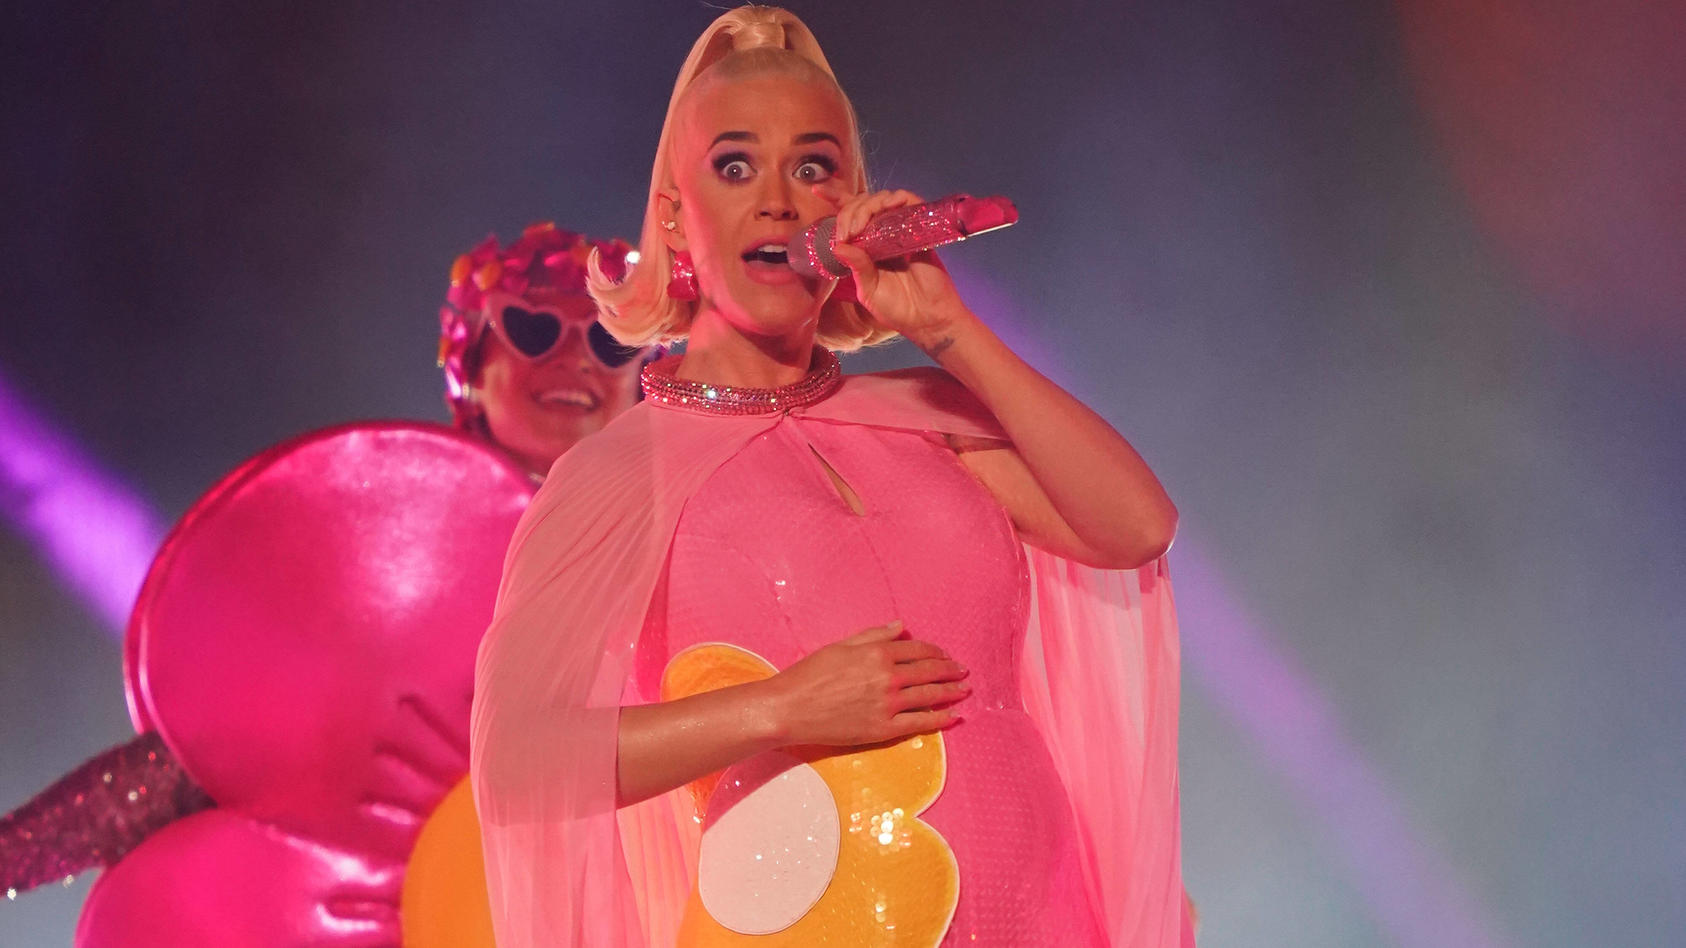  CRICKET WT20 FINAL, Katy Perry, performs on stage while pregnant with the Australian women s cricket team after the Women s T20 World Cup final match between Australia and India at the MCG in Melbourne, Sunday, March 8, 2020.  ACHTUNG: NUR REDAKTION